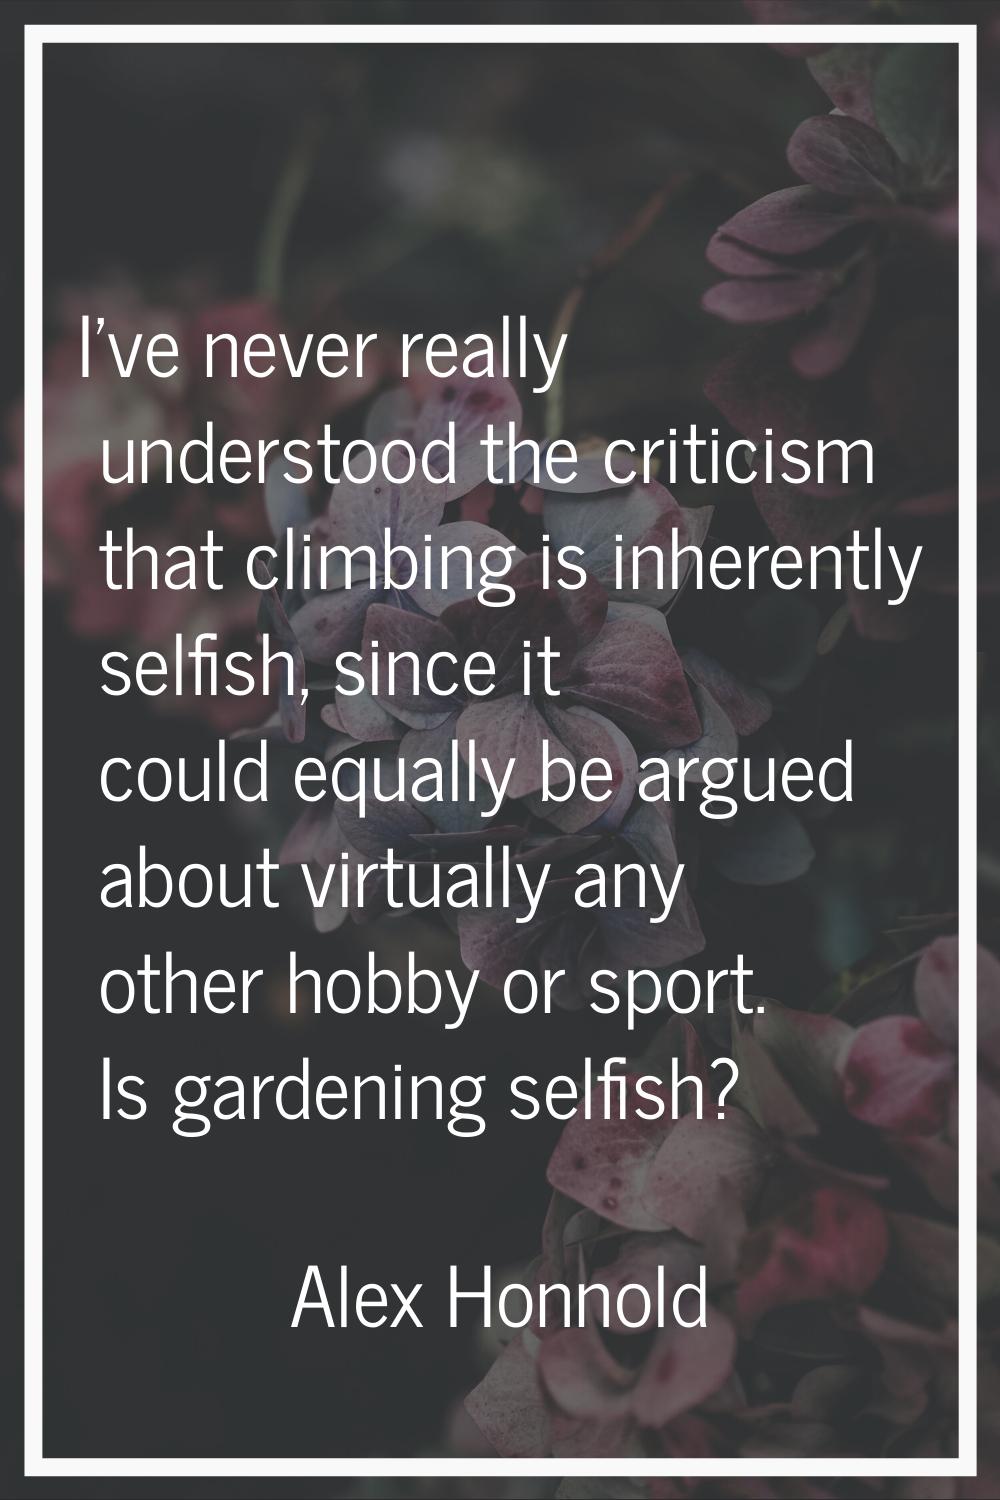 I've never really understood the criticism that climbing is inherently selfish, since it could equa